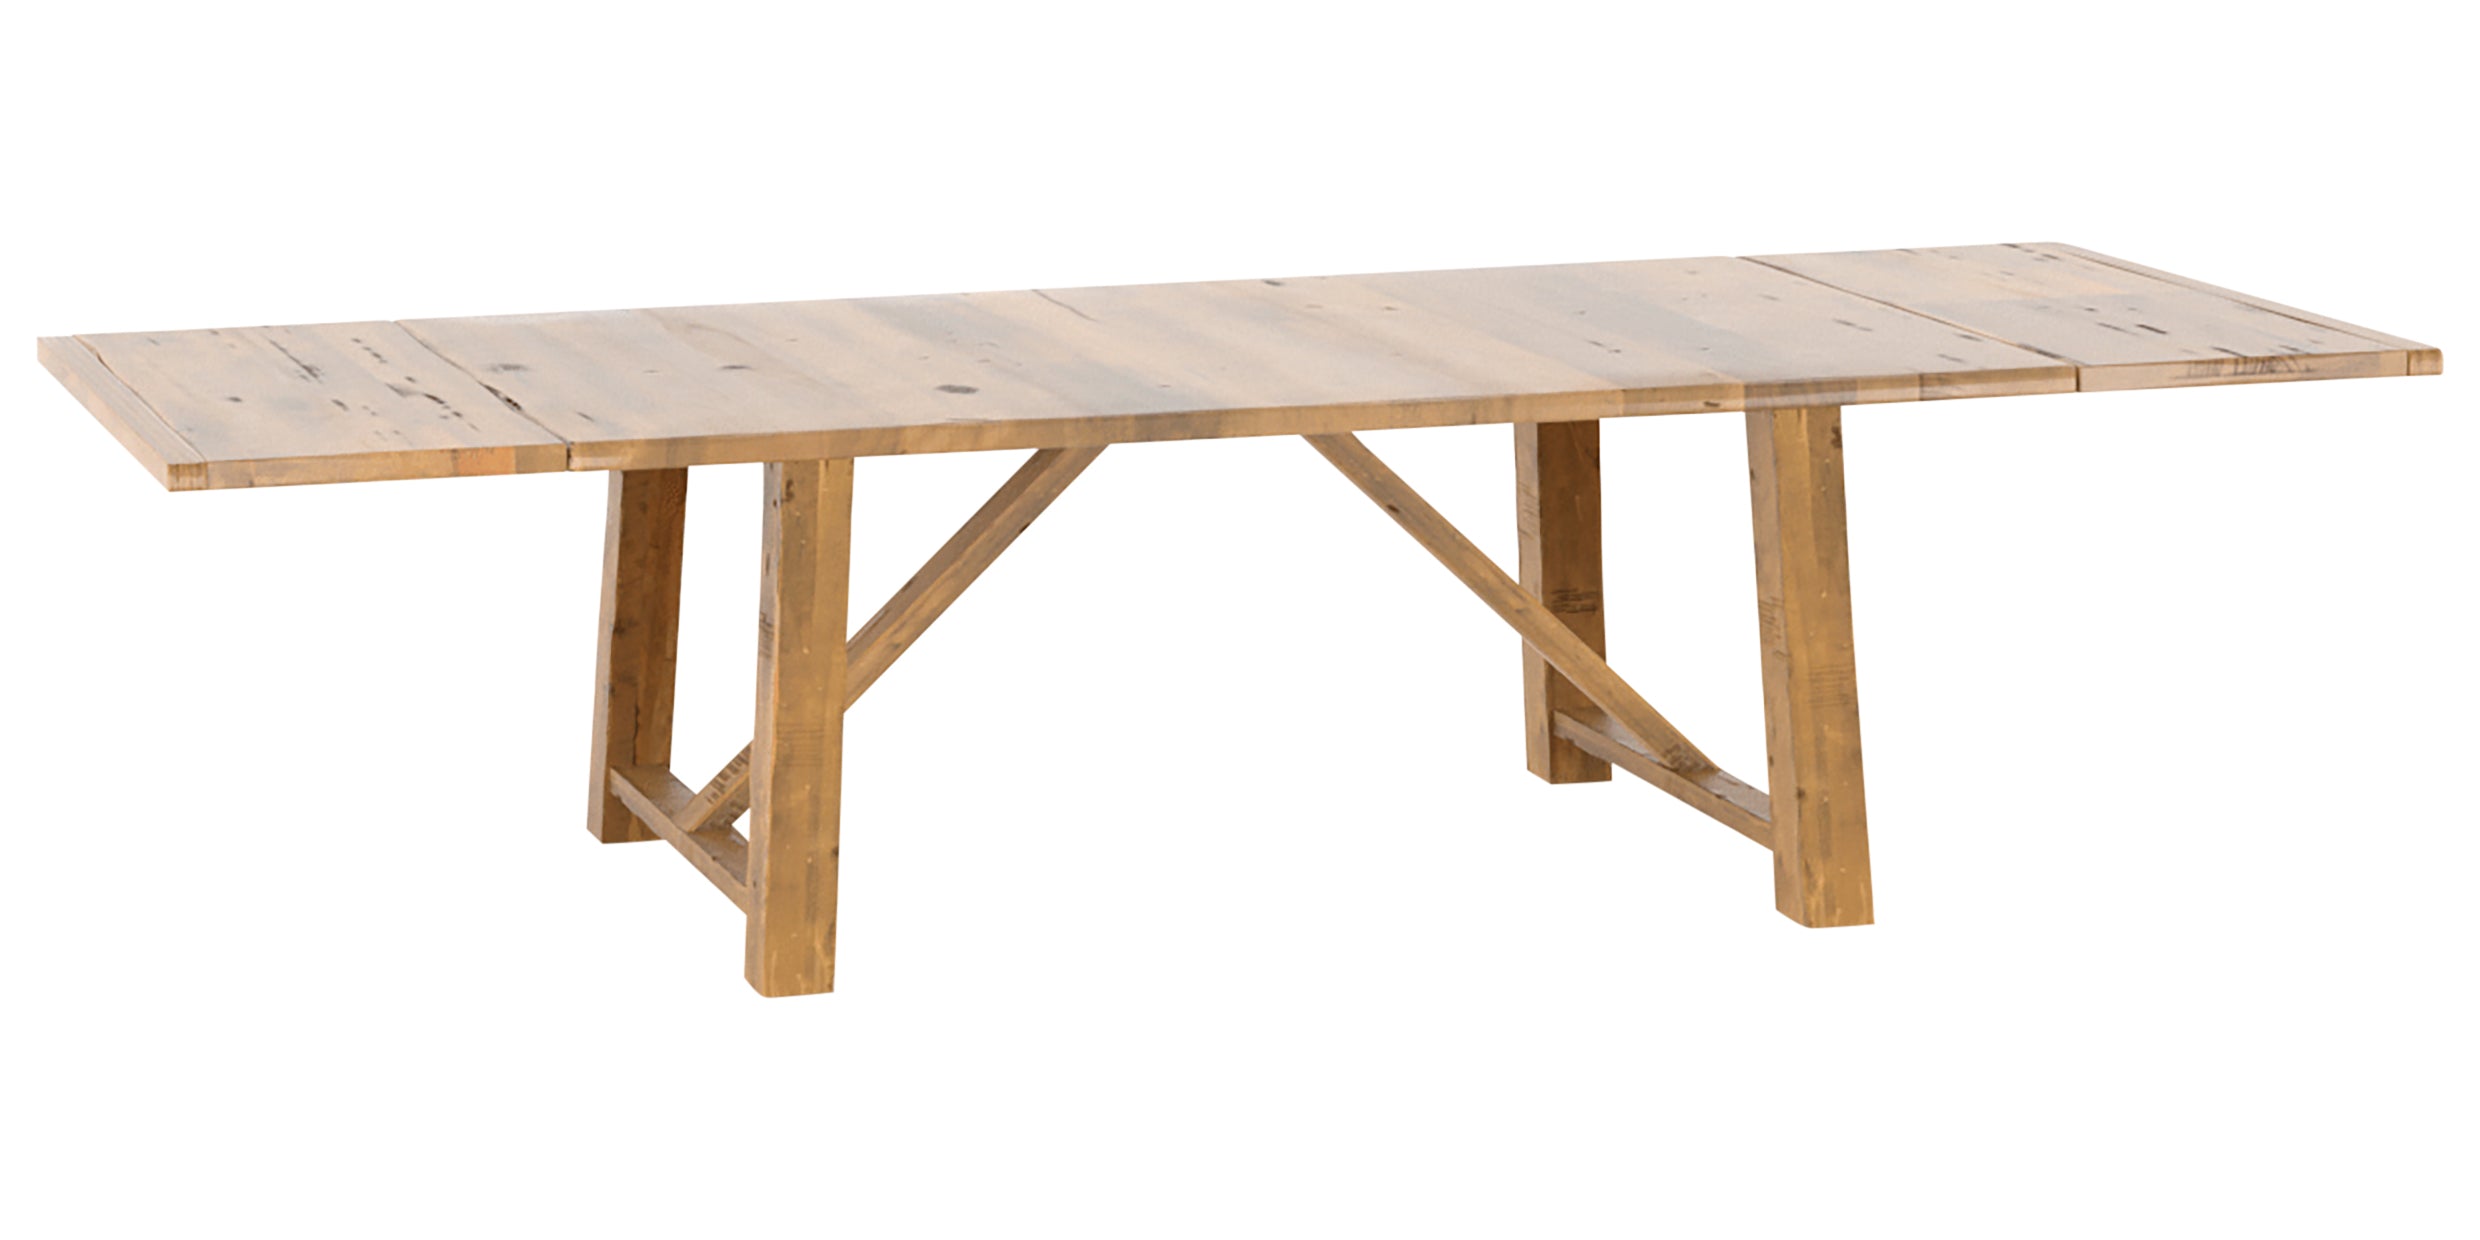 Two Leaves | Canadel Champlain 4284 Dining Table with HM Base | Valley Ridge Furniture